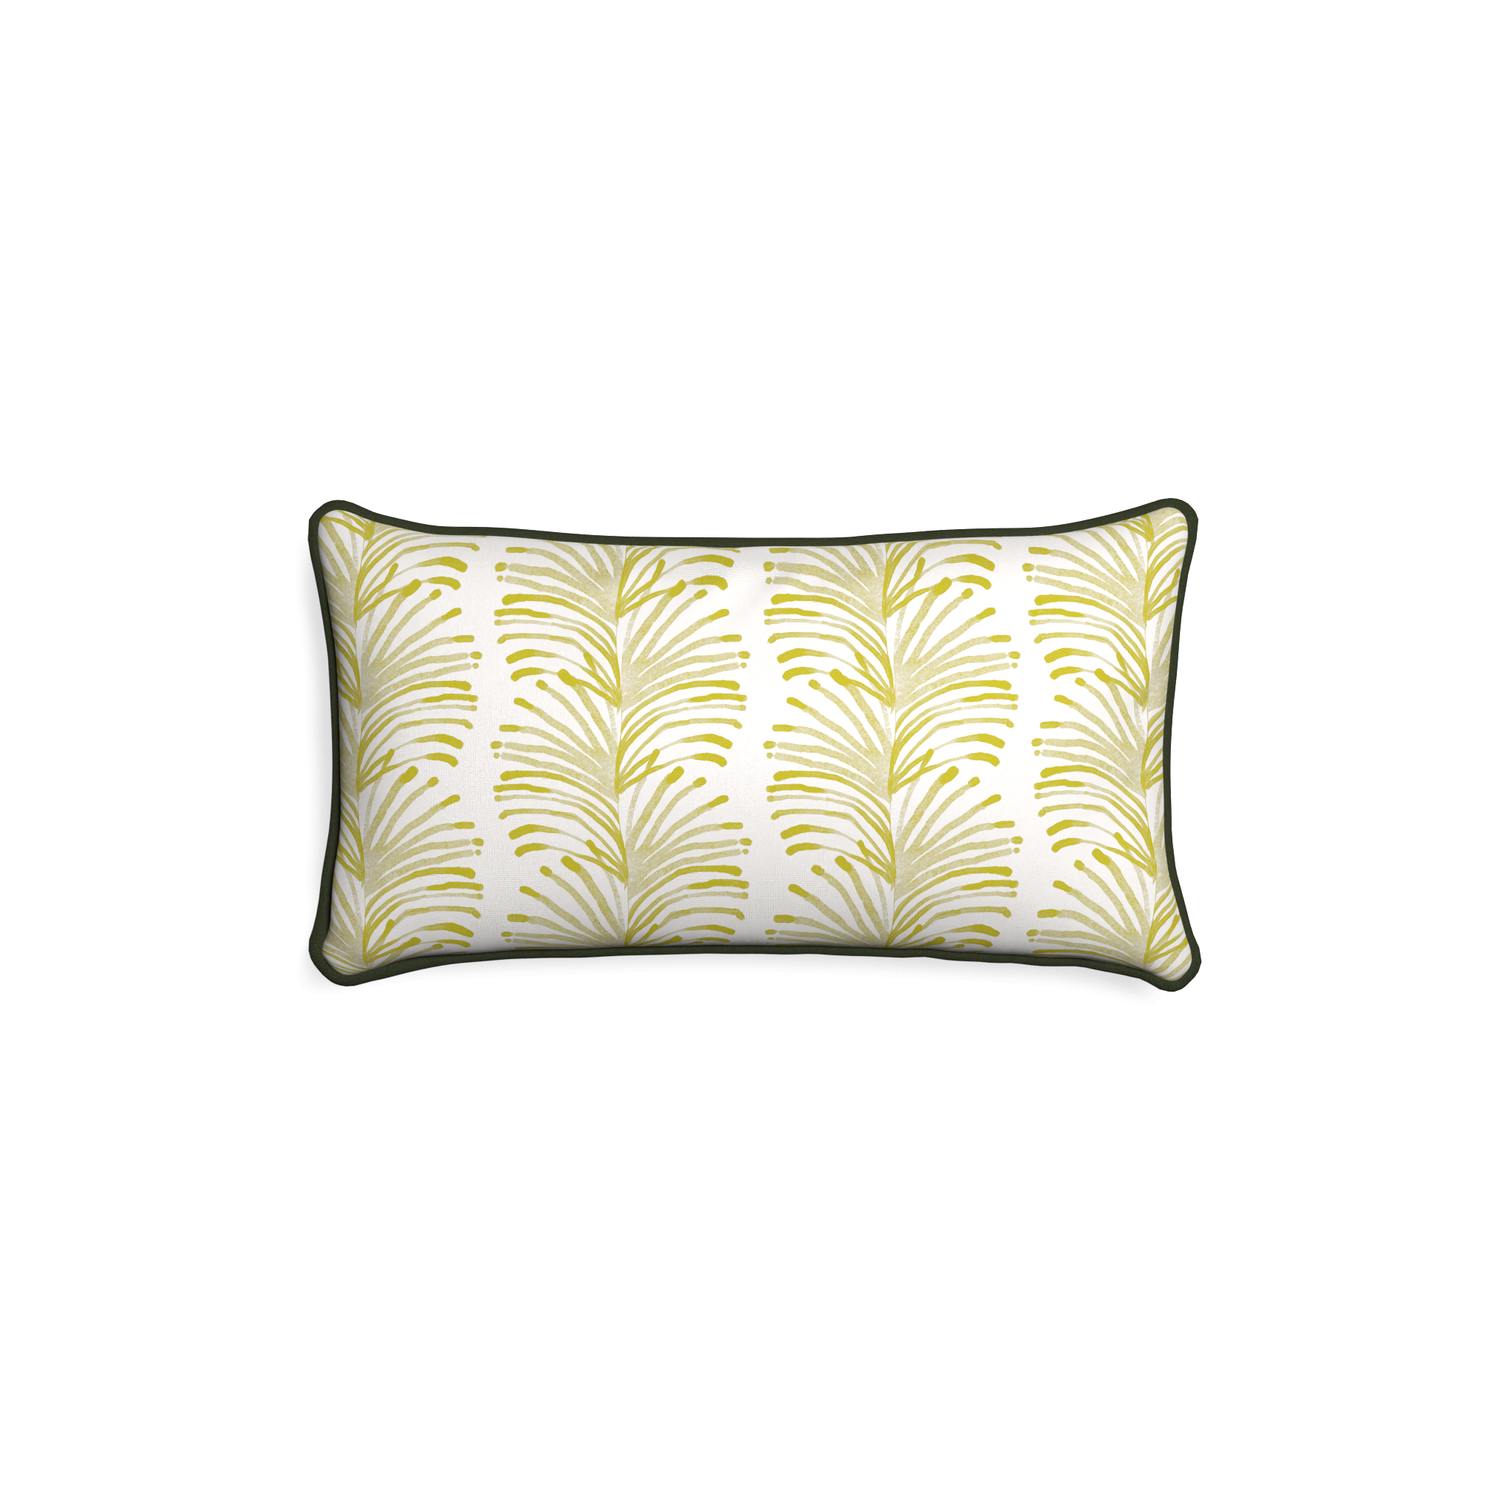 Petite-lumbar emma chartreuse custom yellow stripe chartreusepillow with f piping on white background